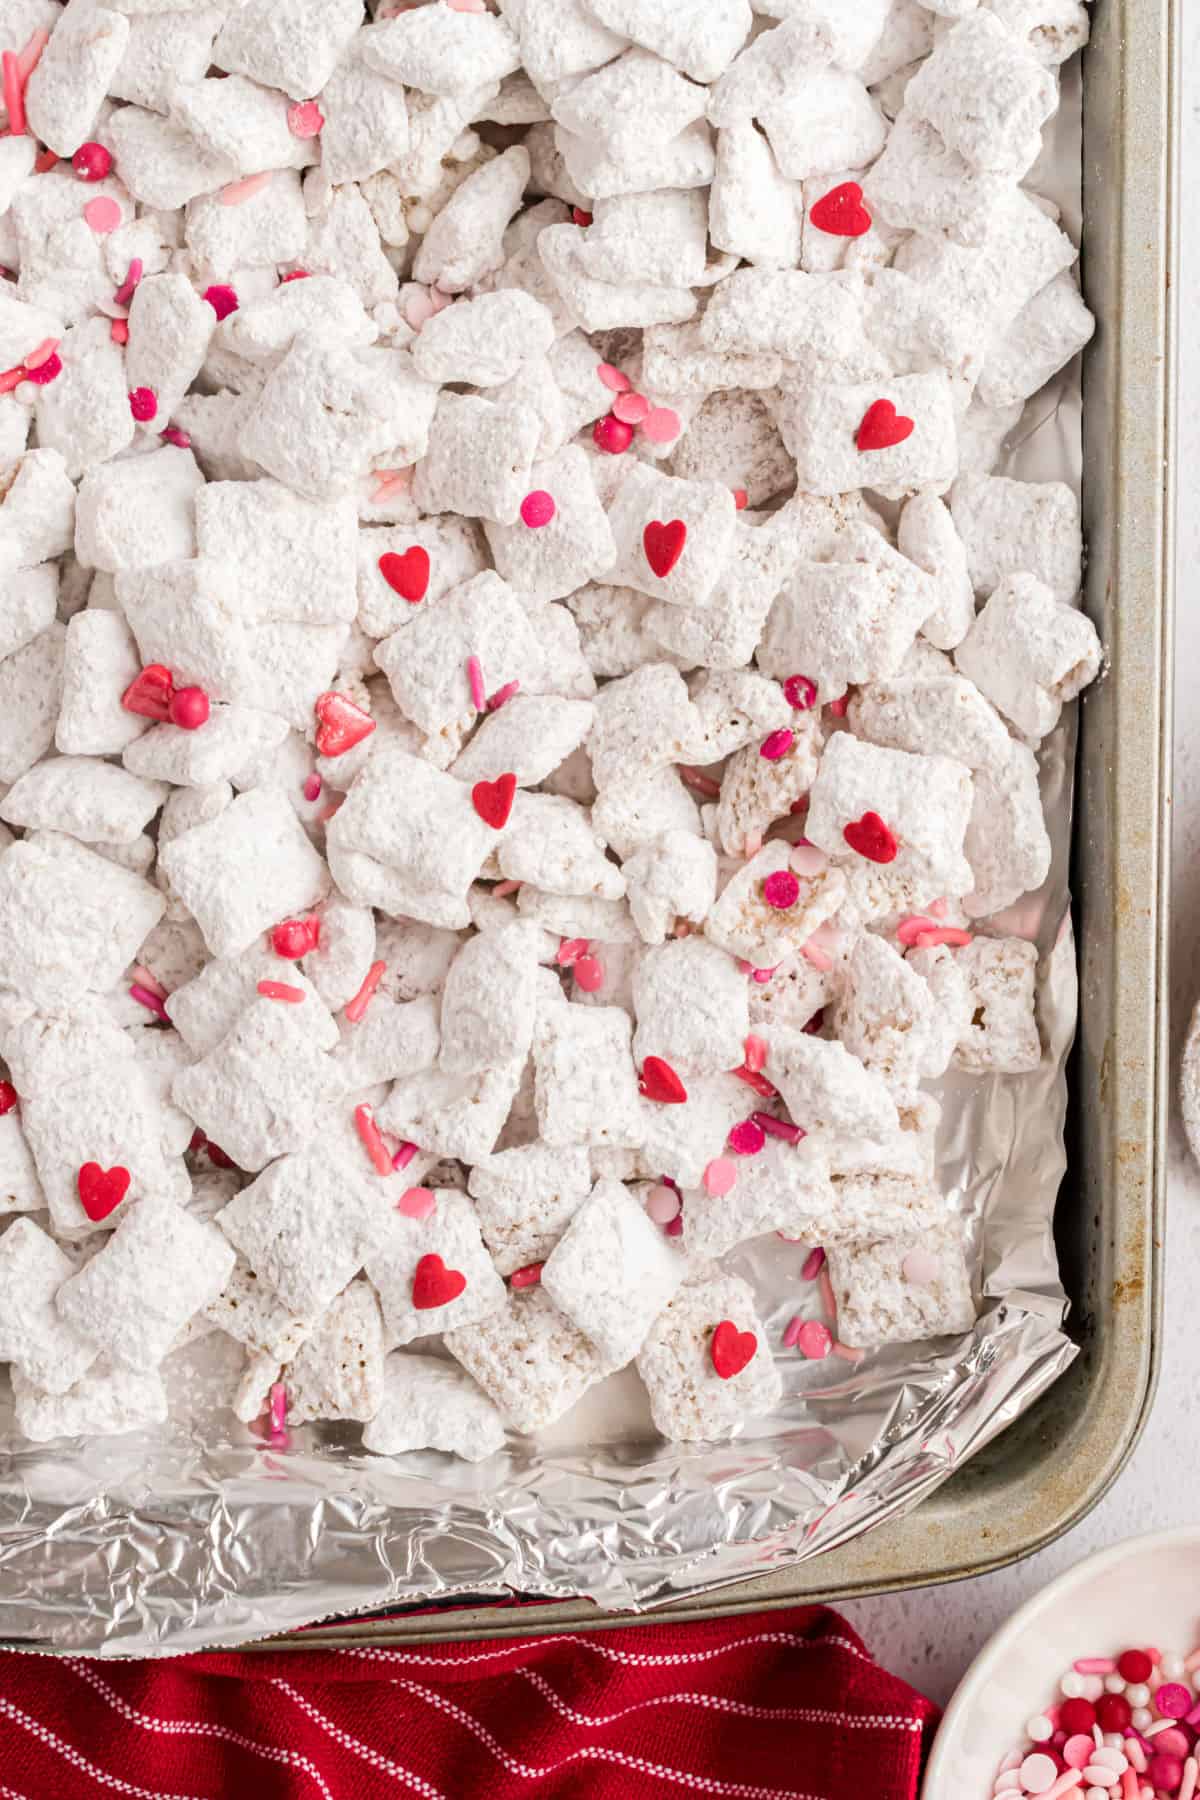 Cherry puppy chow on foil lined cookie sheet.